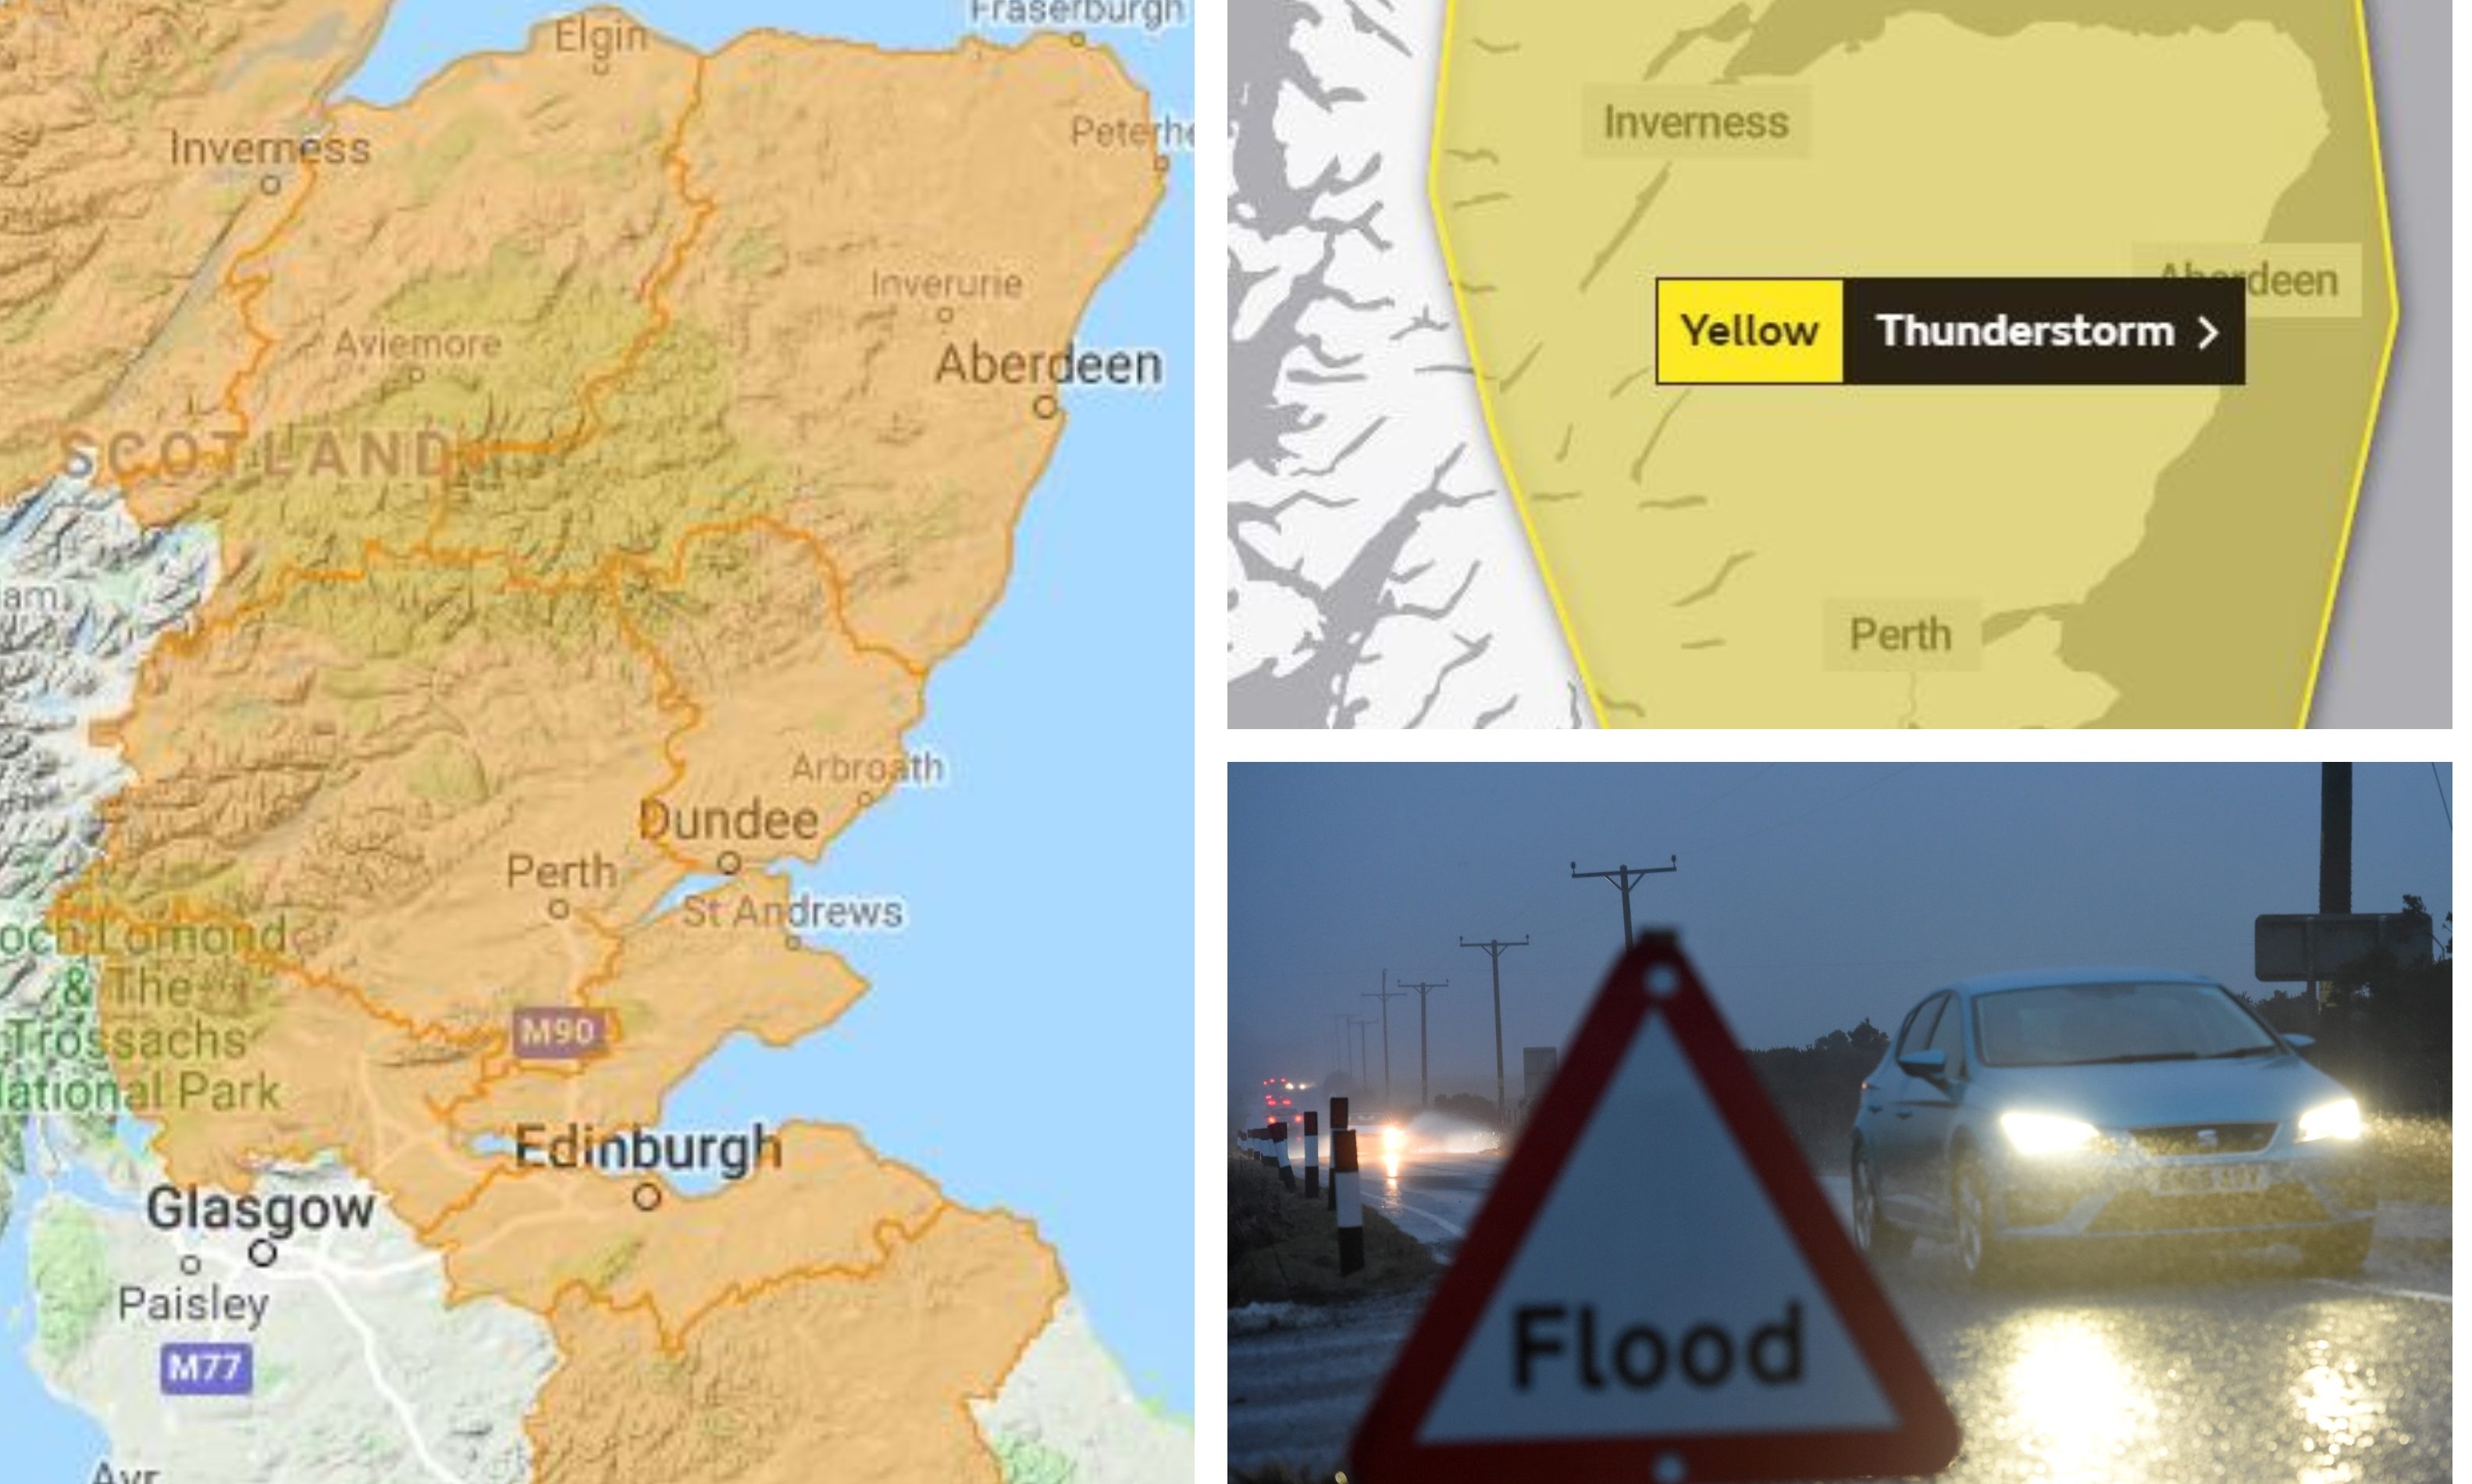 Sepa has issued flood warnings covering all of Tayside and Fife.